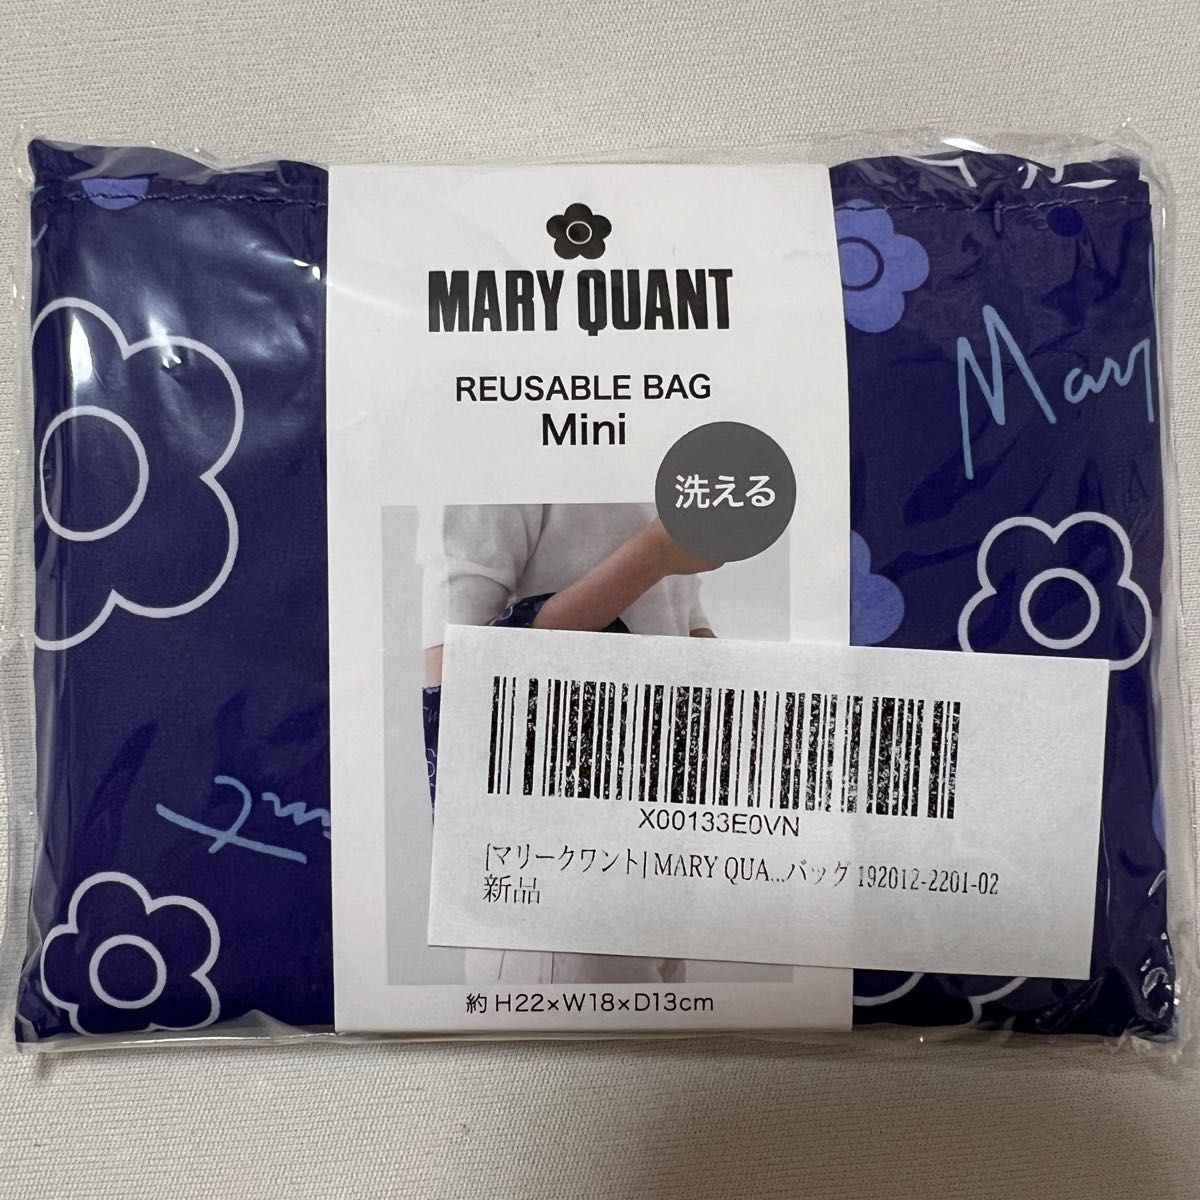 ☆MARY QUANT☆マリークワント☆ 新品 洗えるエコバッグ/マイバッグ(小)